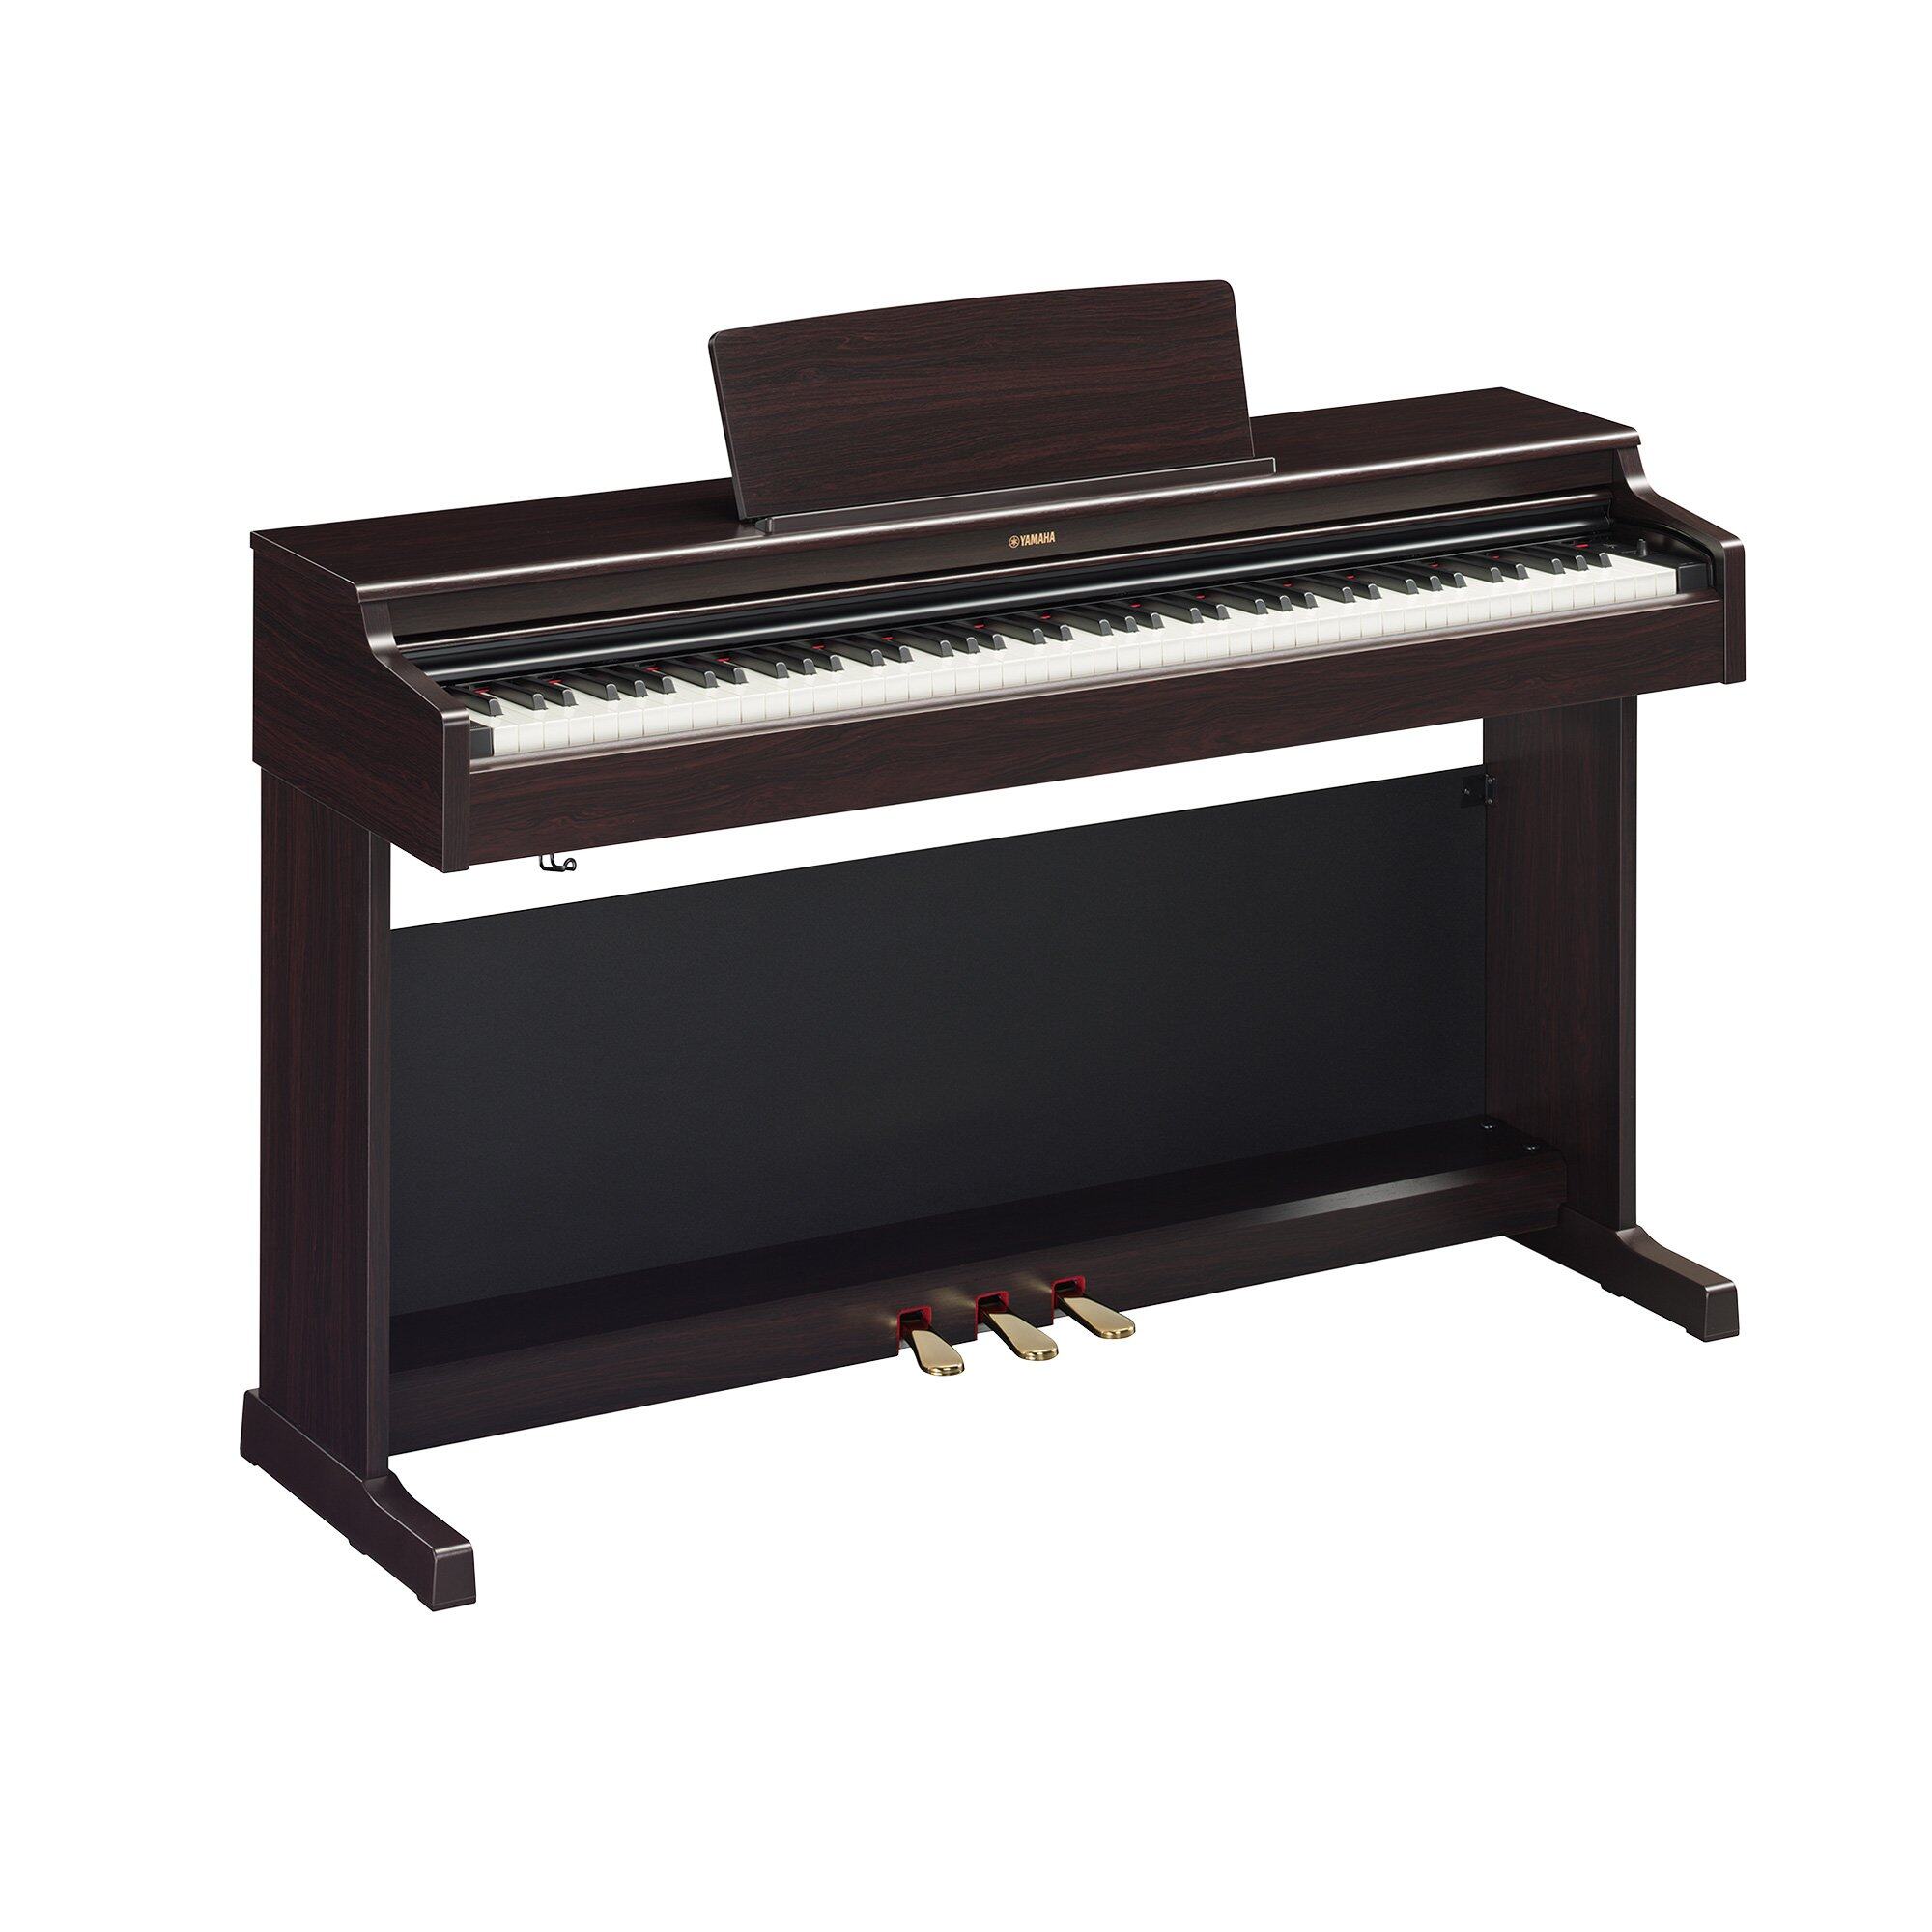 88 key stepwise weighting keyboard for authentic acoustic piano performance and semi tone pedal control